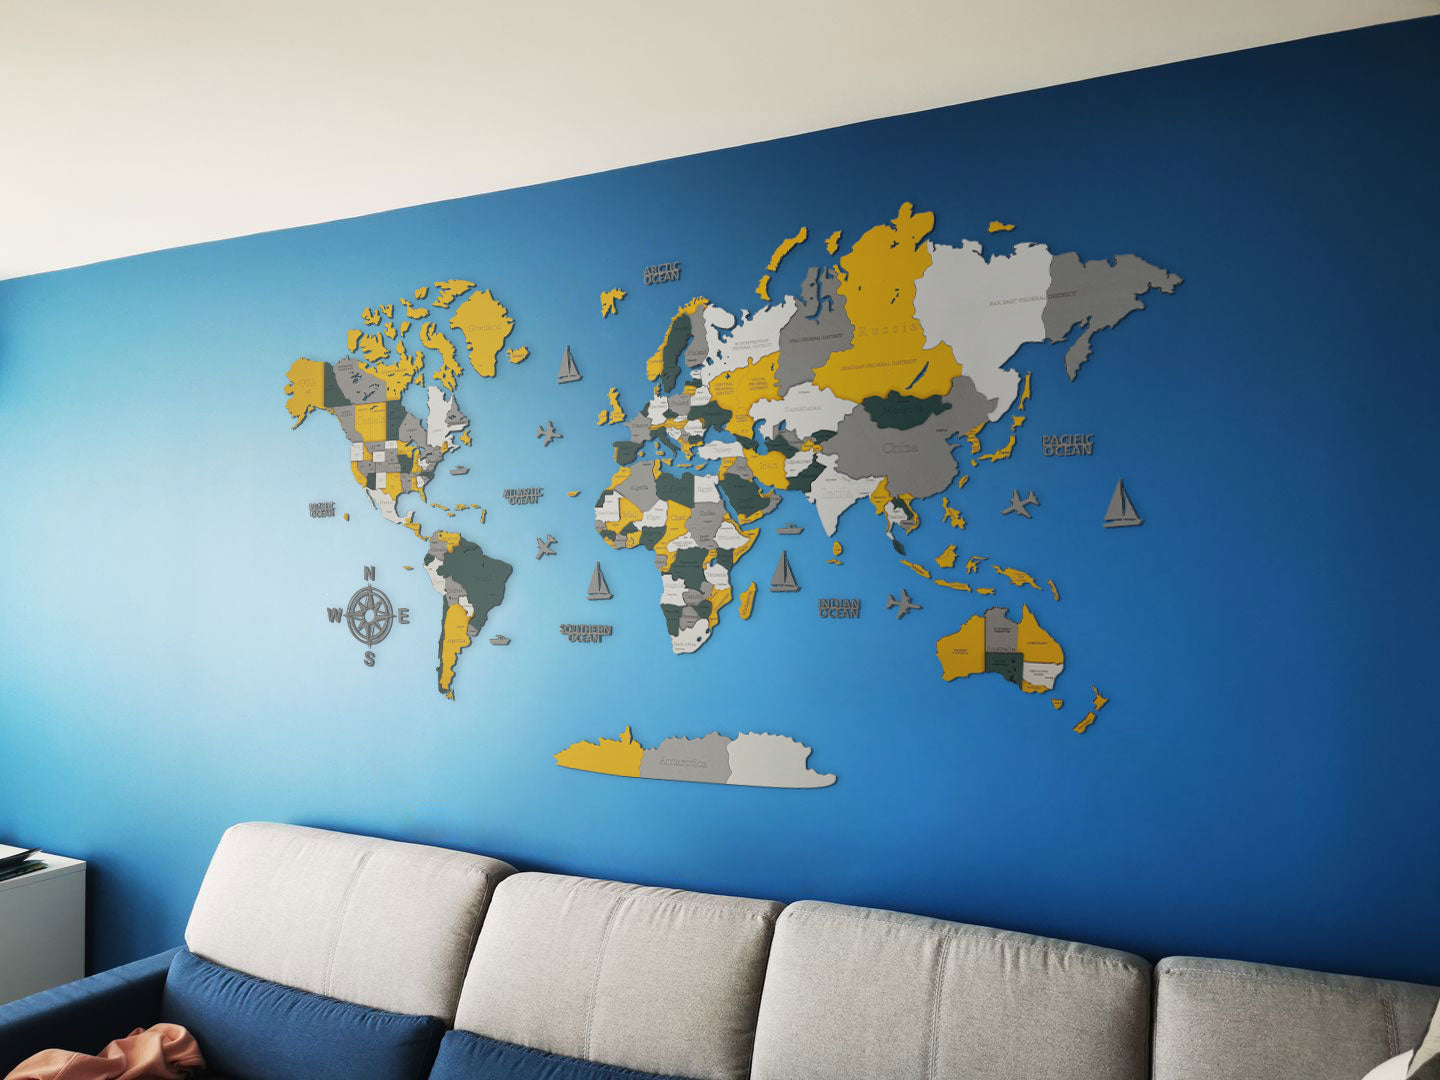 3 stunning examples of colorful walls and a Wooden World Map (Pt.2)